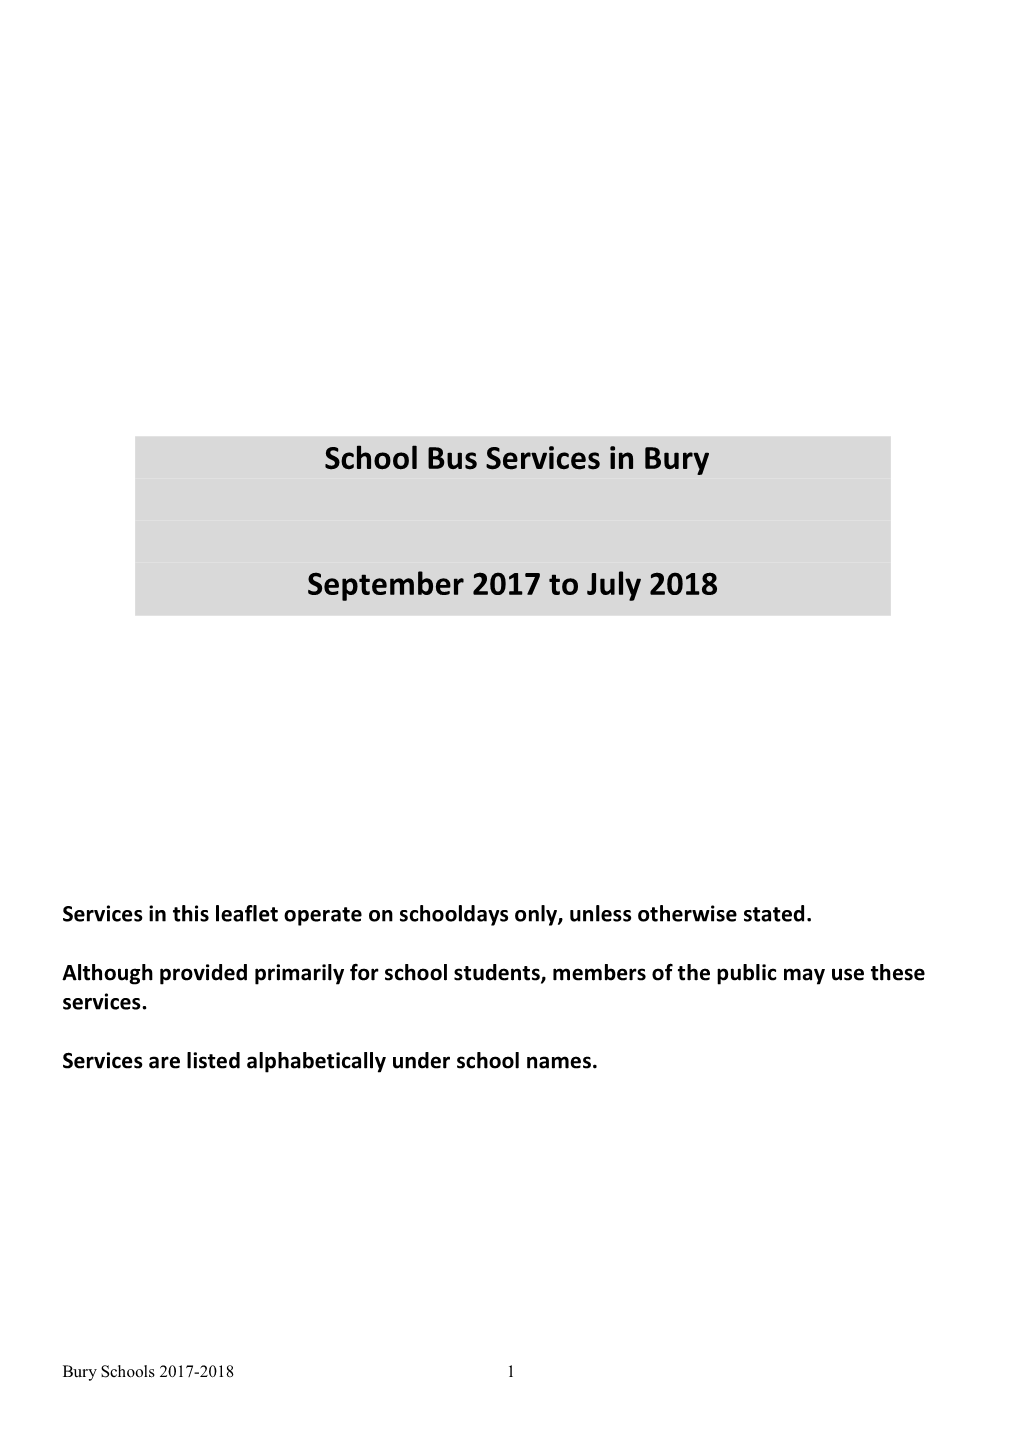 School Bus Services in Bury September 2017 to July 2018